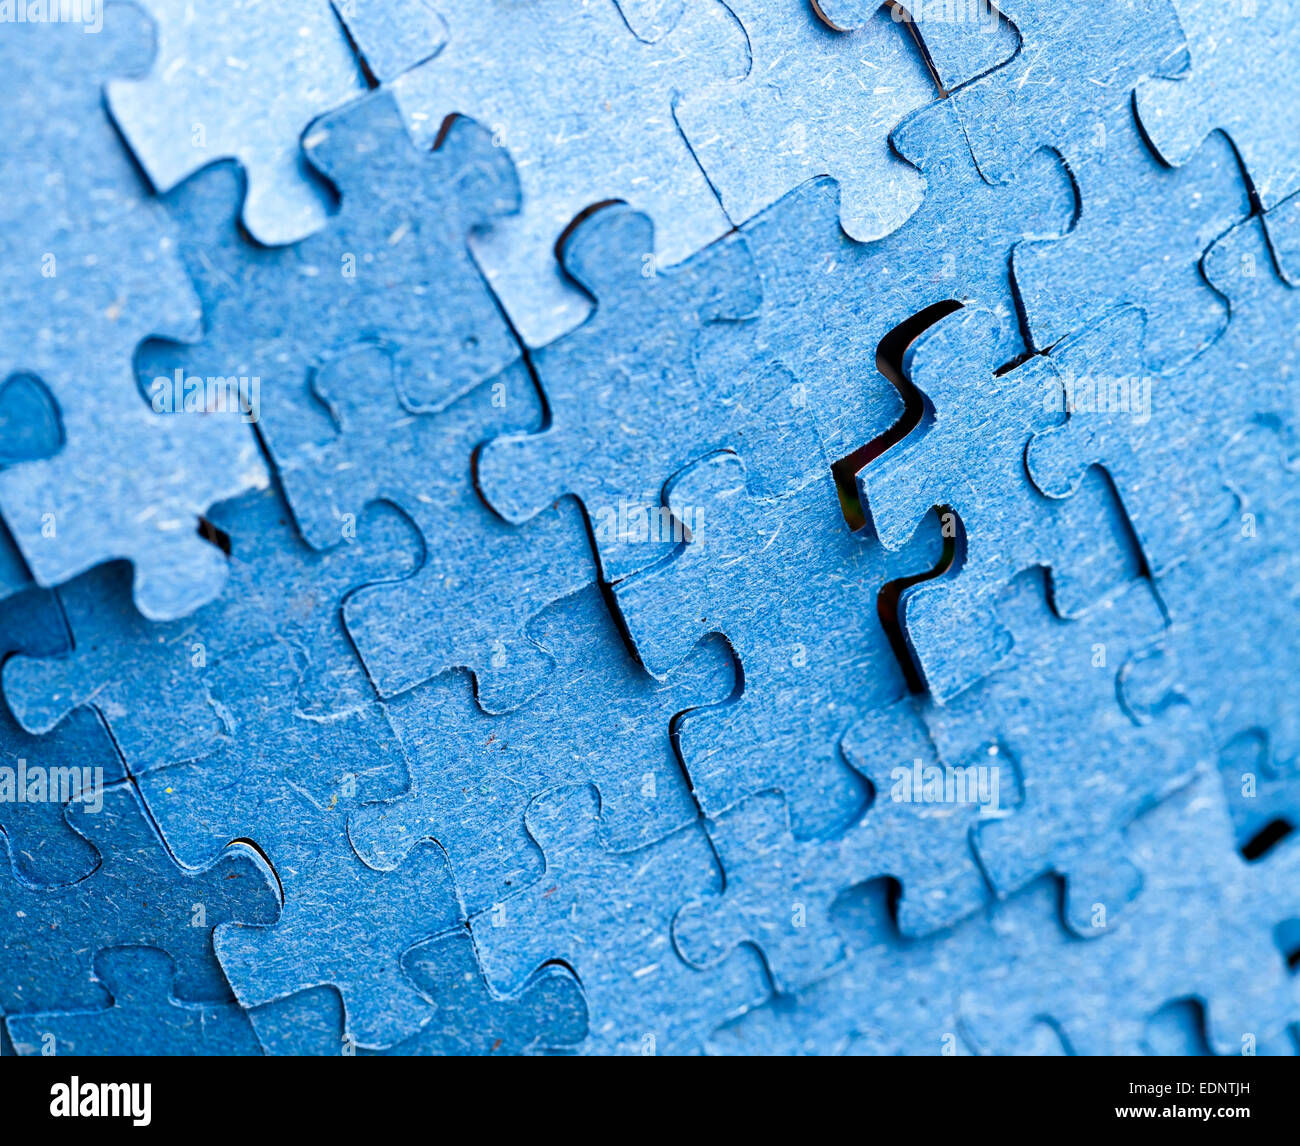 Real photograph of the backside of blue puzzle jigsaw in available light  Stock Photo - Alamy